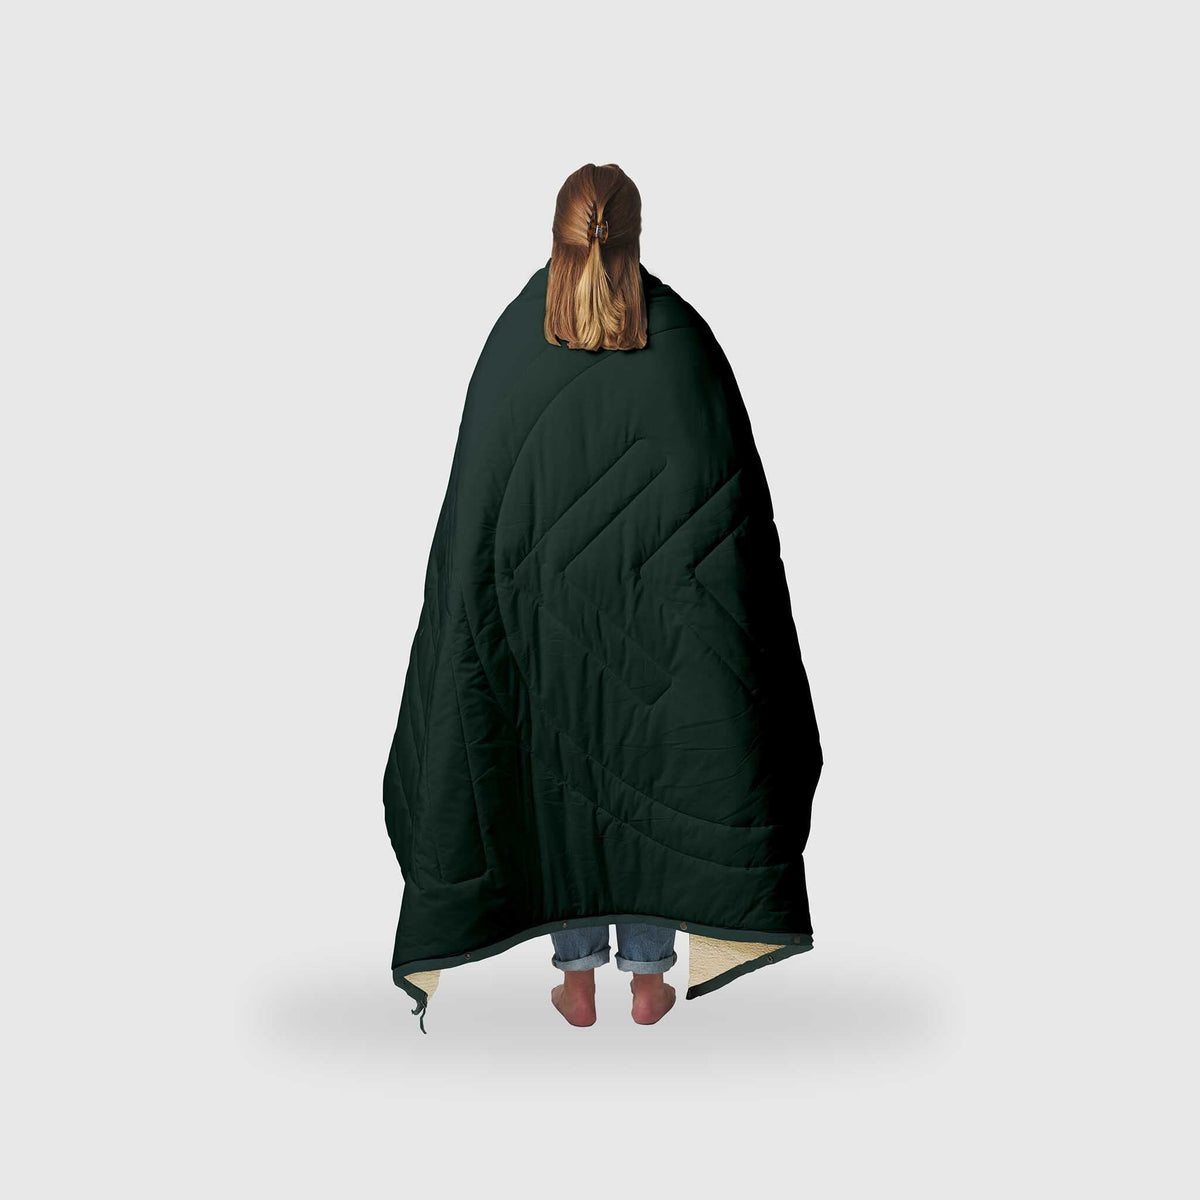 VOITED CloudTouch® Indoor/Outdoor Camping Blanket - Green Gabels Blankets VOITED 